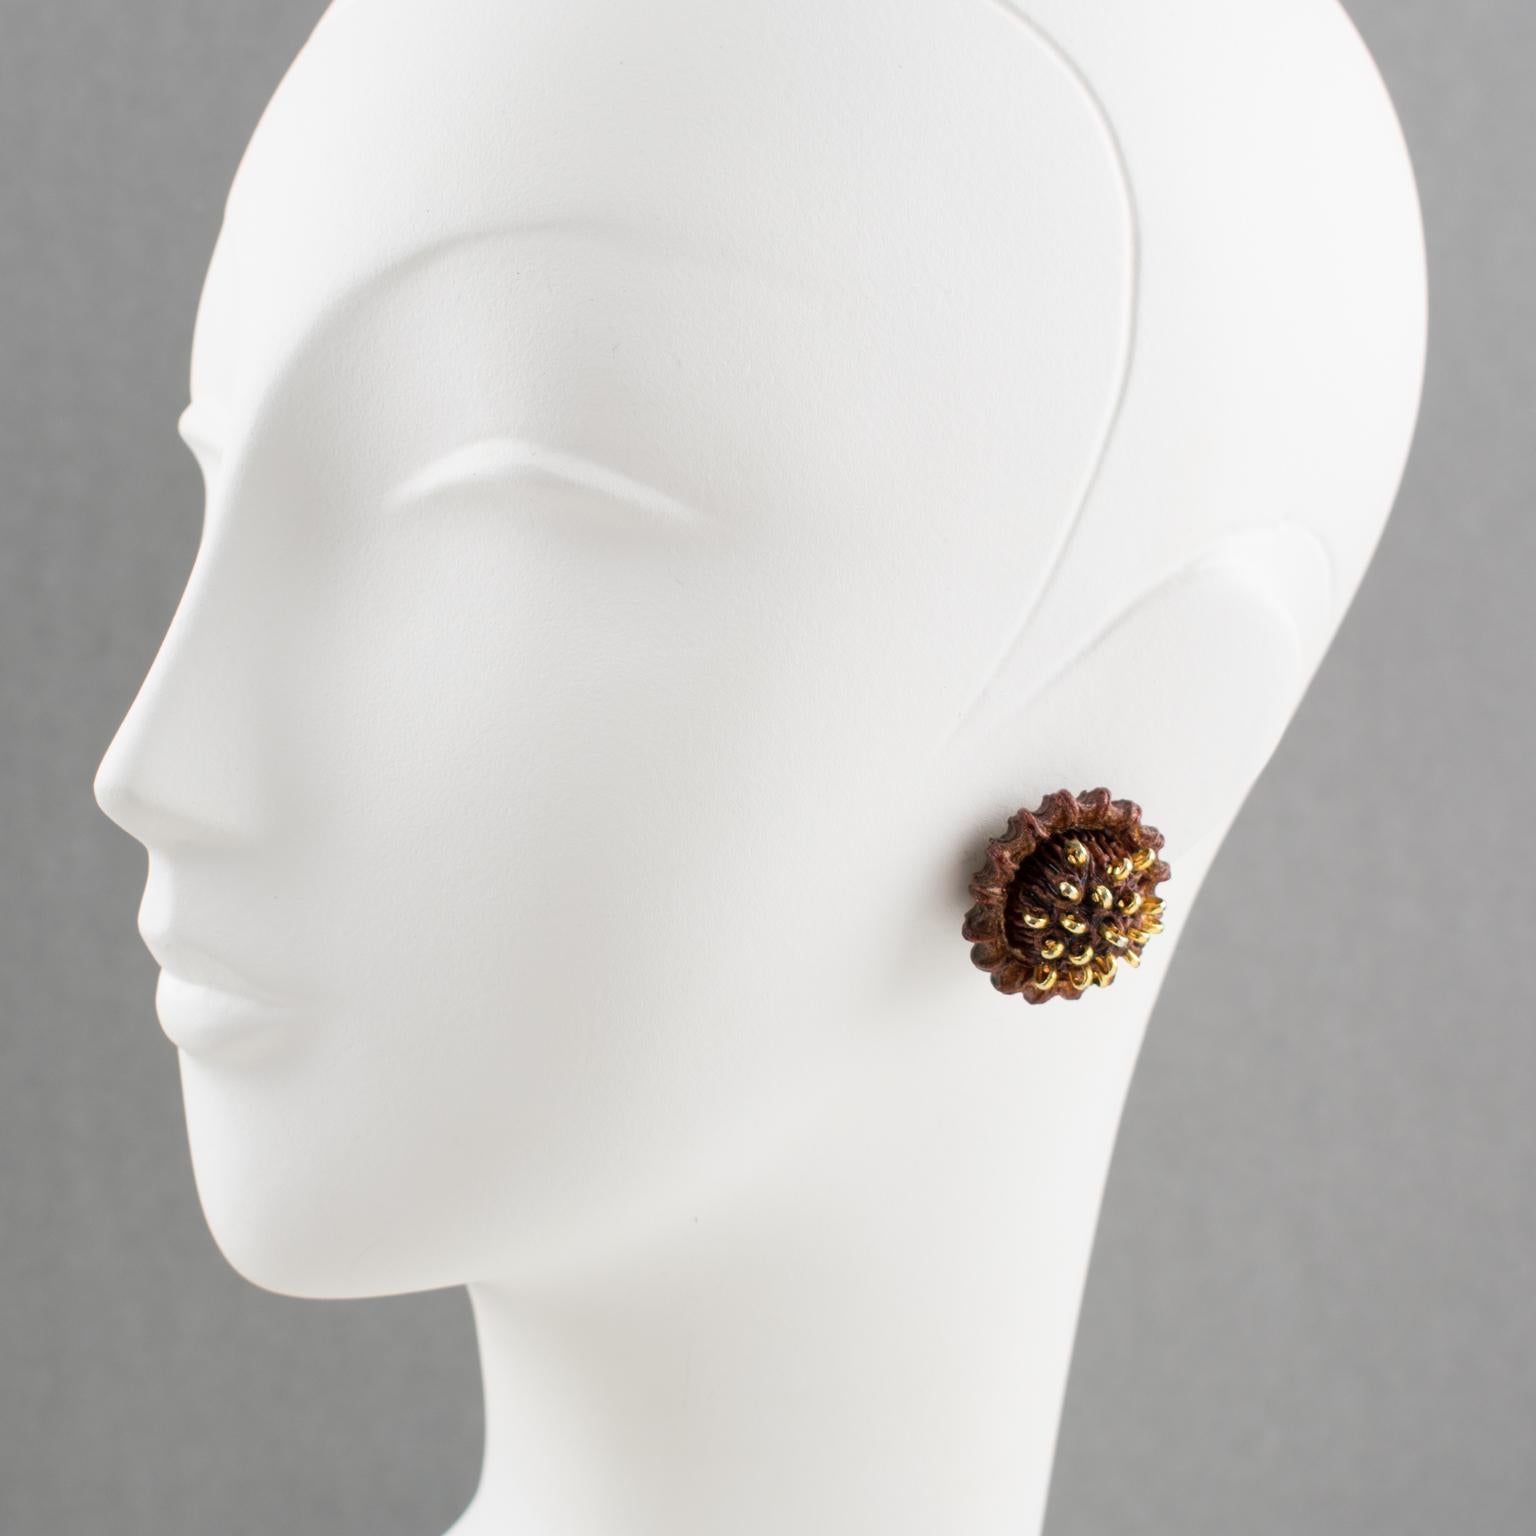 French jewelry designer Francoise Montague Paris hand-crafted these lovely clip-on earrings in the 1980s. The round domed shape boasts a cocoa brown resin with a stylized flower ornate with tiny brass studs. There is no visible signature like all